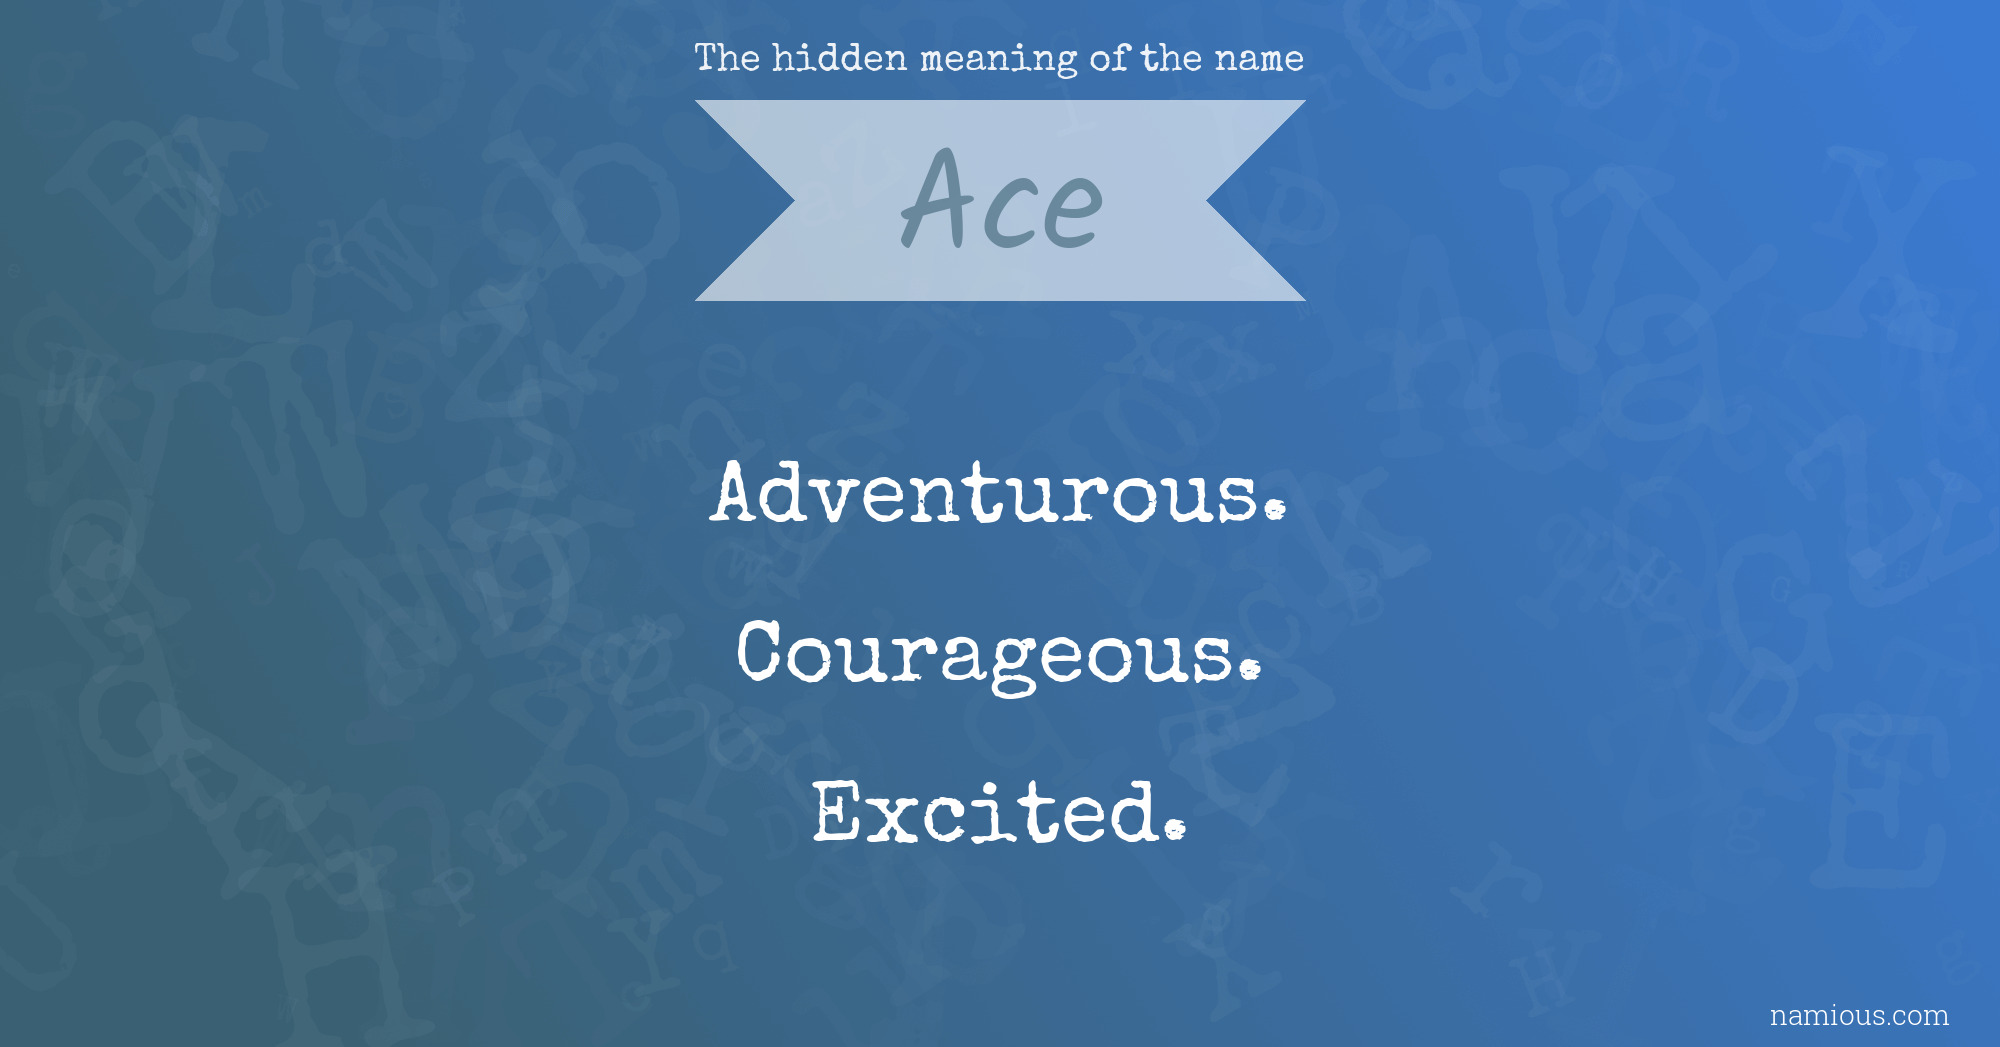 The hidden meaning of the name Ace